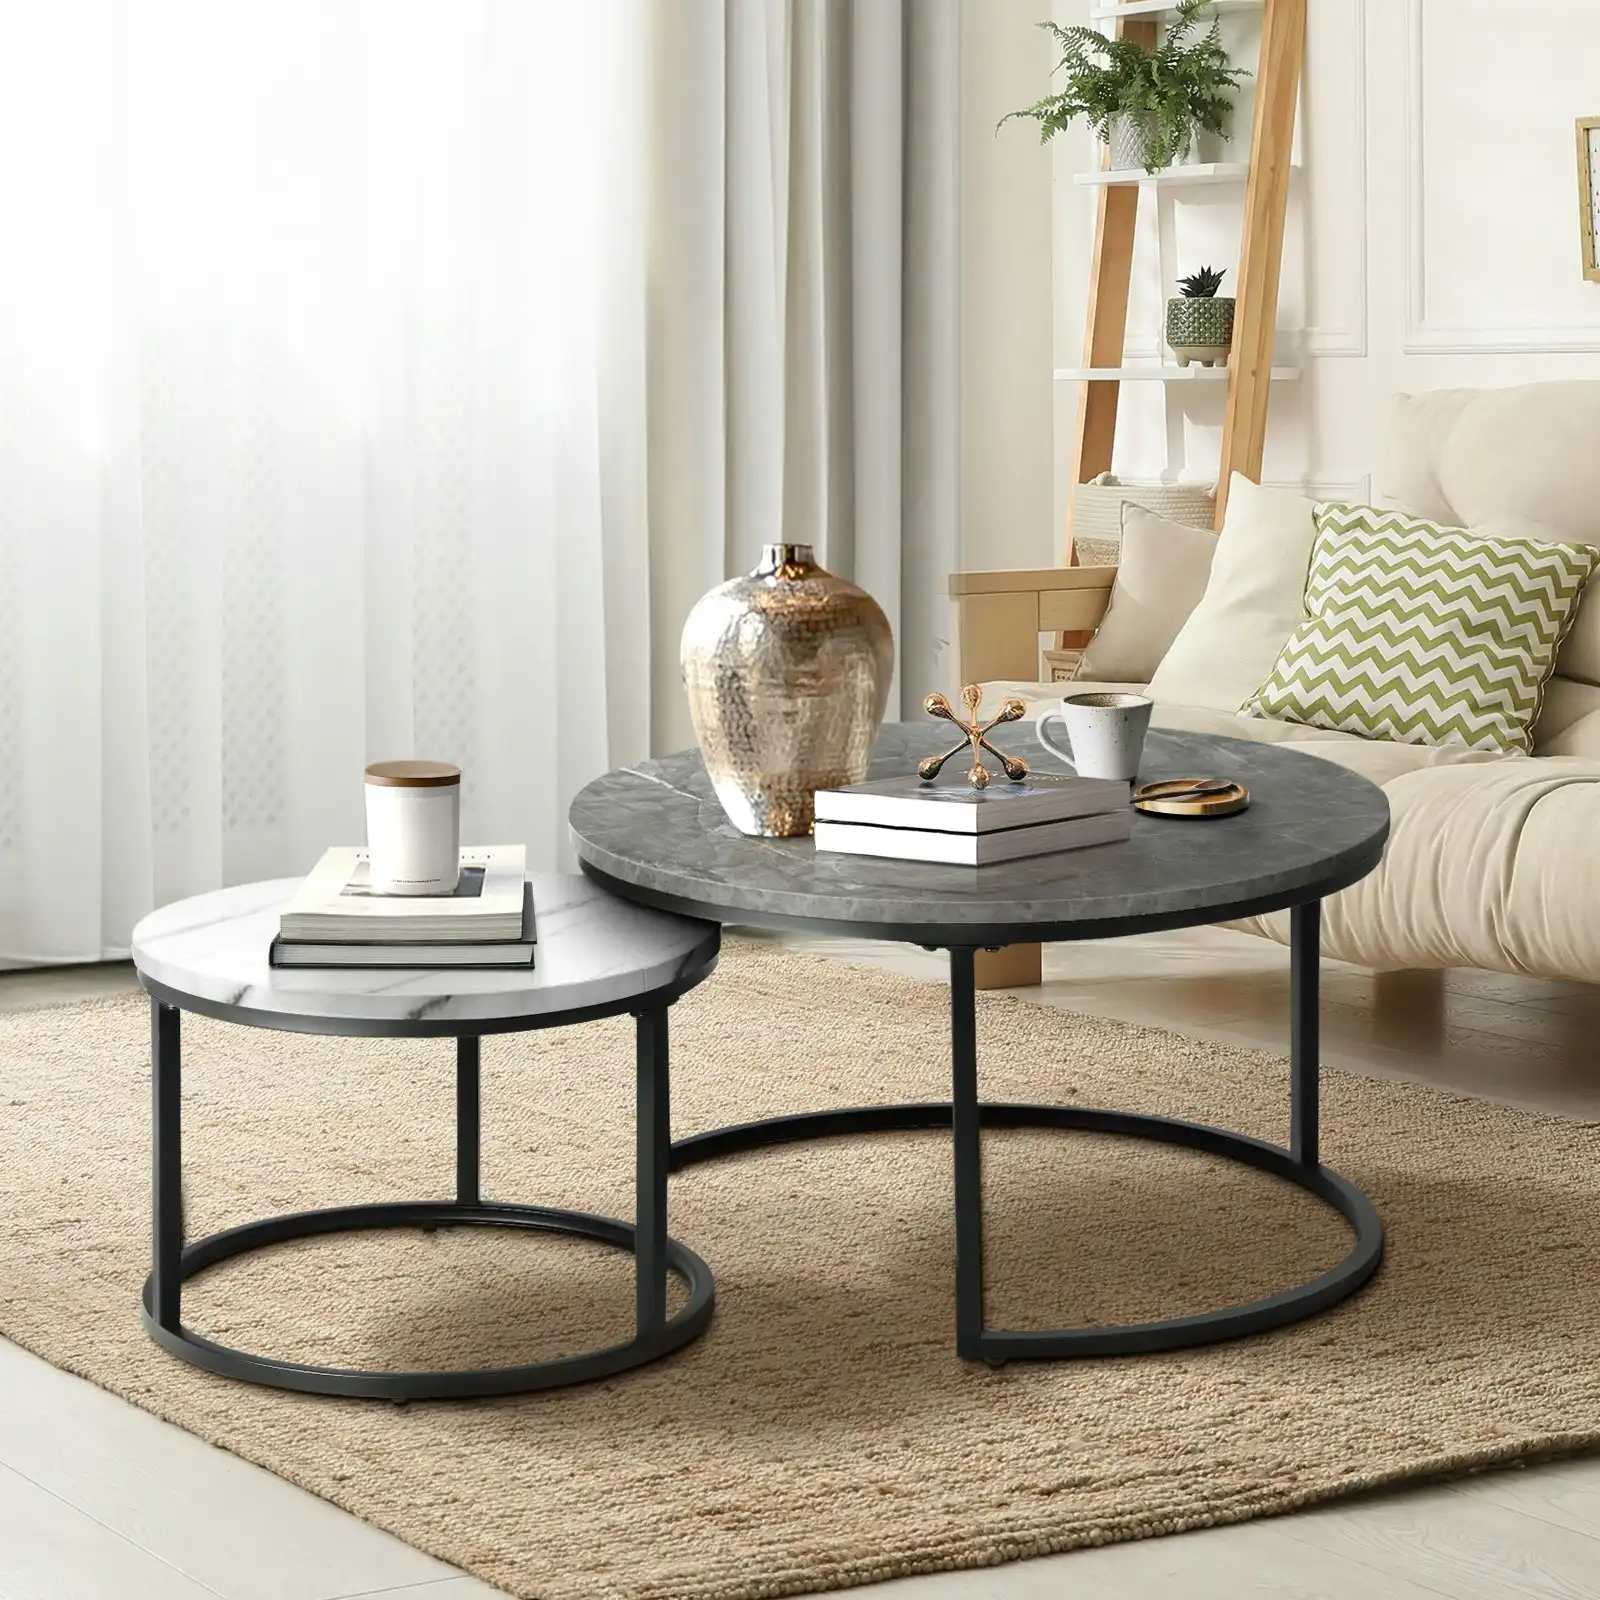 Oikiture Set of 2 Coffee Table Round Marble Nesting Side End Tables Grey & White